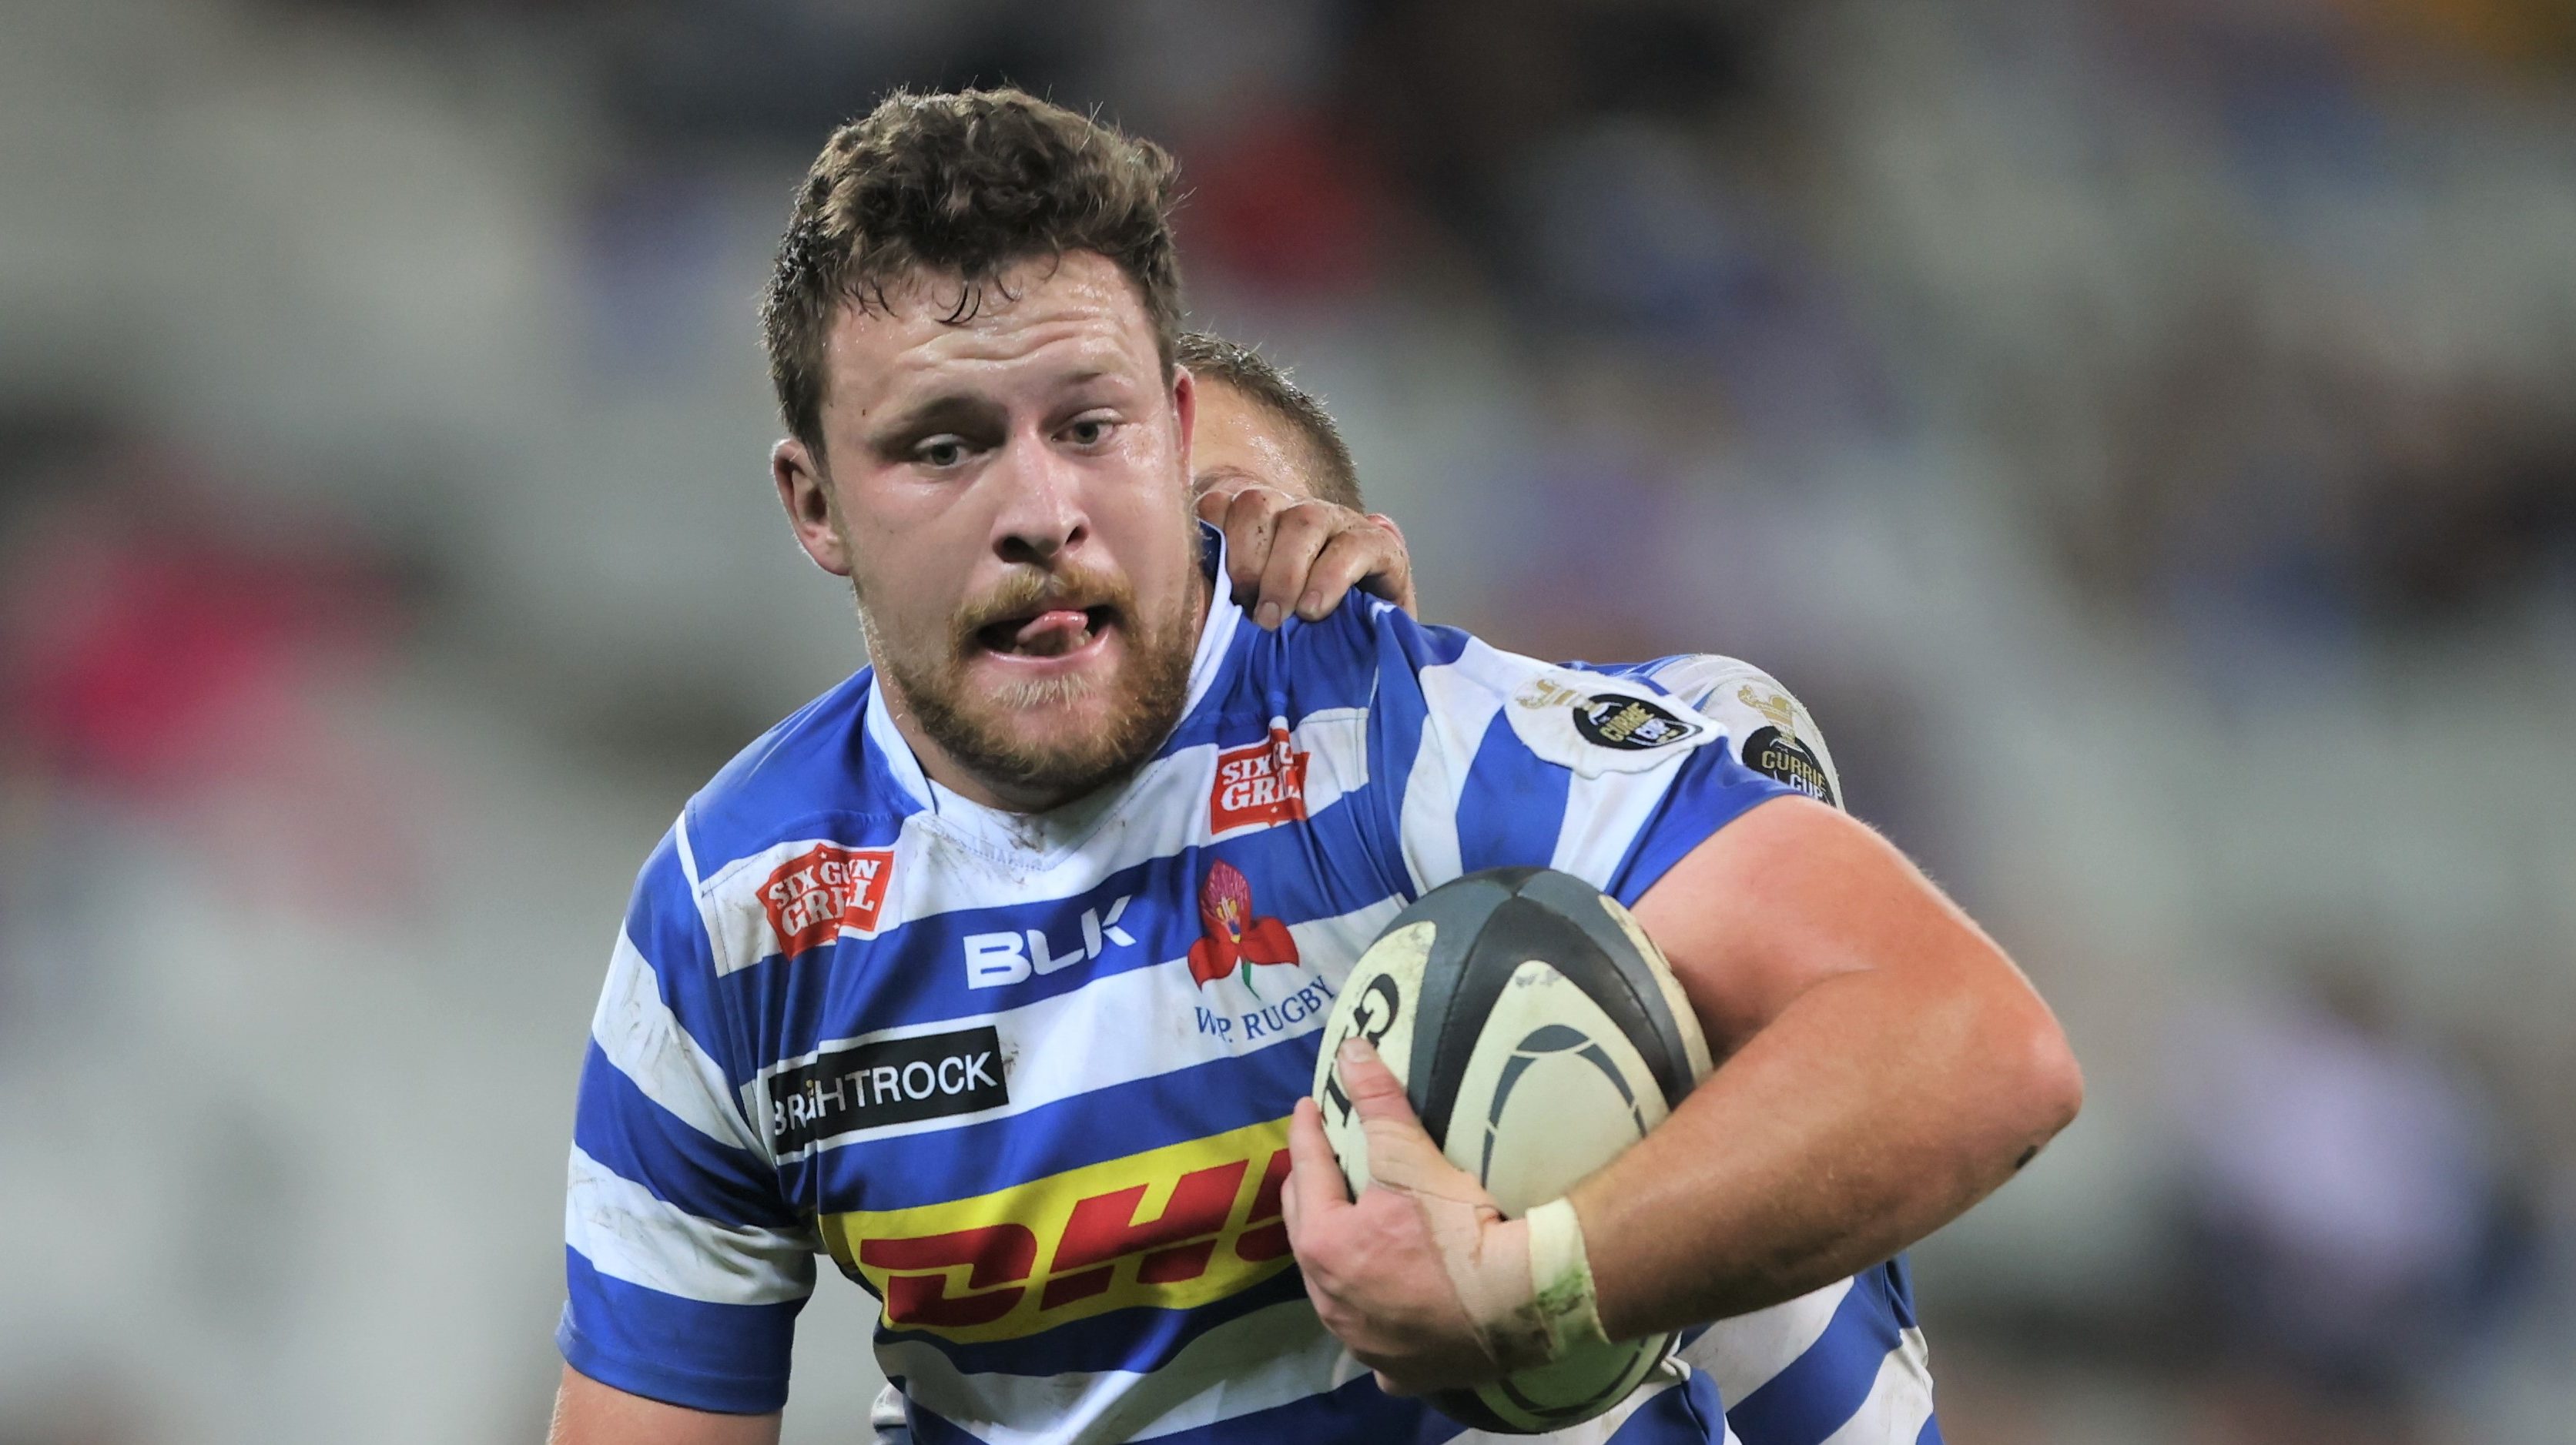 CAPE TOWN, SOUTH AFRICA - APRIL 29: Andre-Hugo Venter of Western Province during the Currie Cup, Premier Division match between DHL Western Province and Vodacom Bulls at DHL Stadium on April 29, 2023 in Cape Town, South Africa. (Photo by Carl Fourie/Gallo Images)